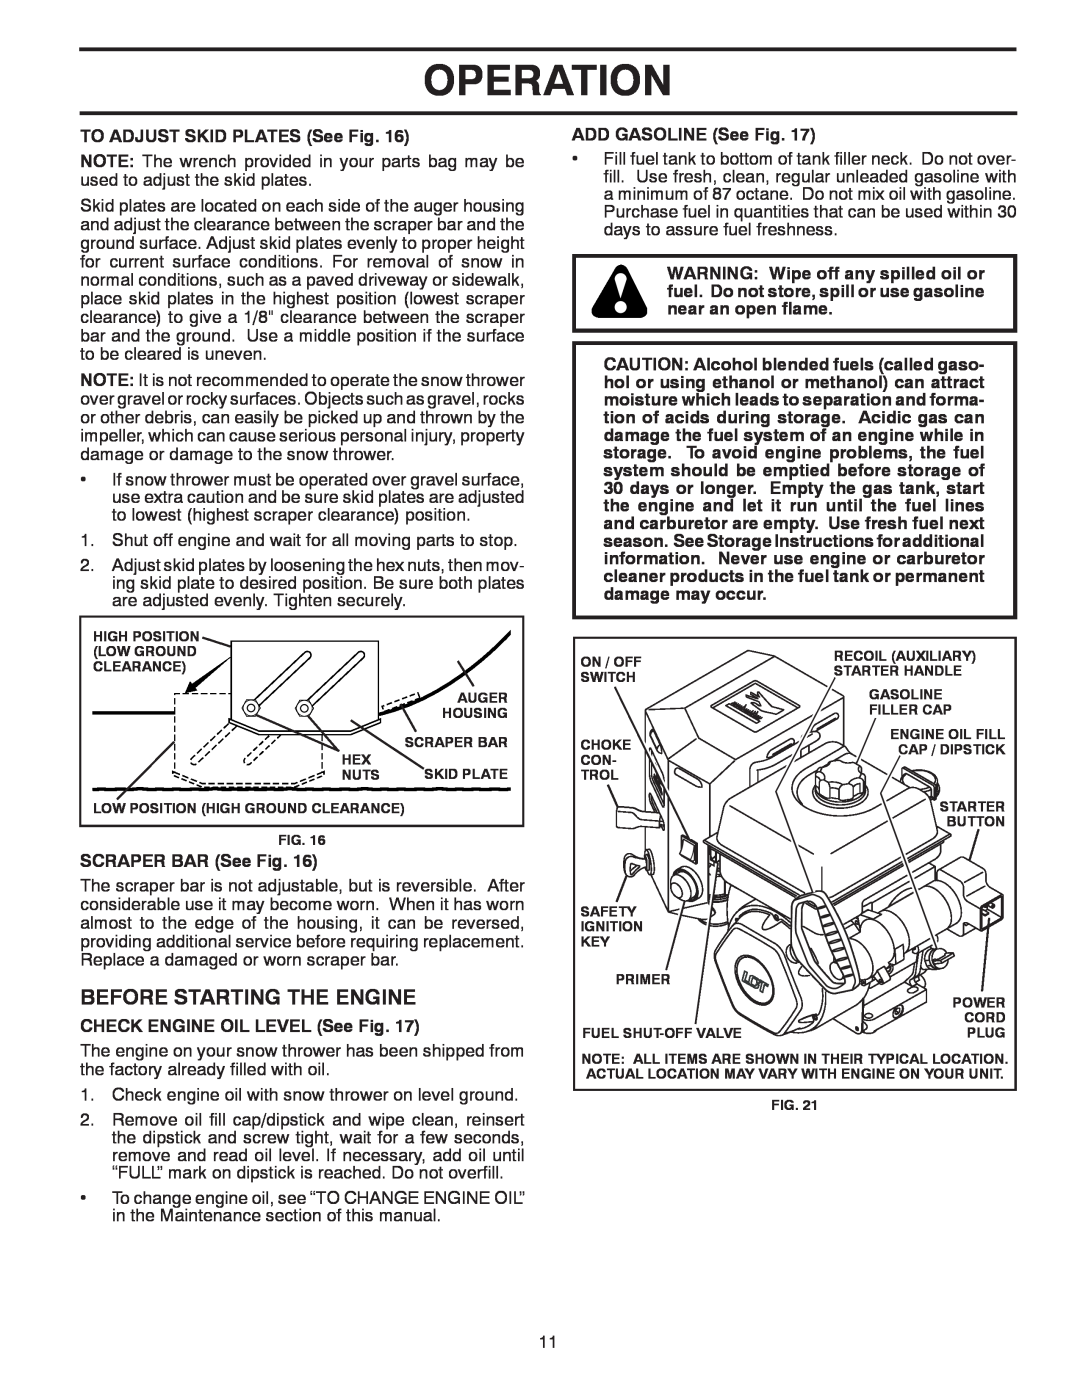 McCulloch 96192004001 Before Starting The Engine, Operation, TO ADJUST SKID PLATES See Fig, SCRAPER BAR See Fig 